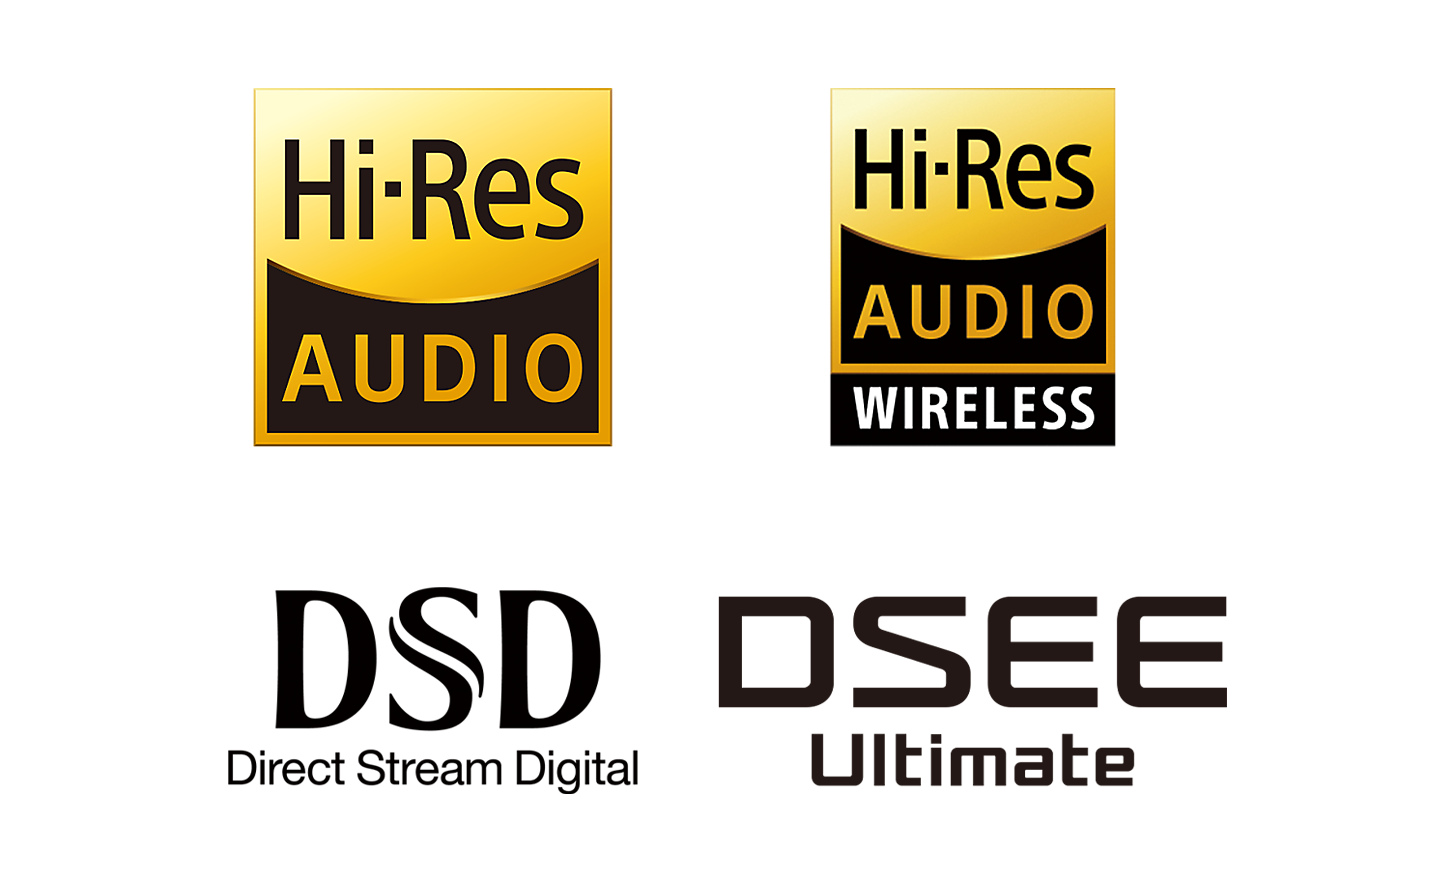 Logótipos High-Res Audio, High-Res Audio WIRELESS, DSD e DSEE.